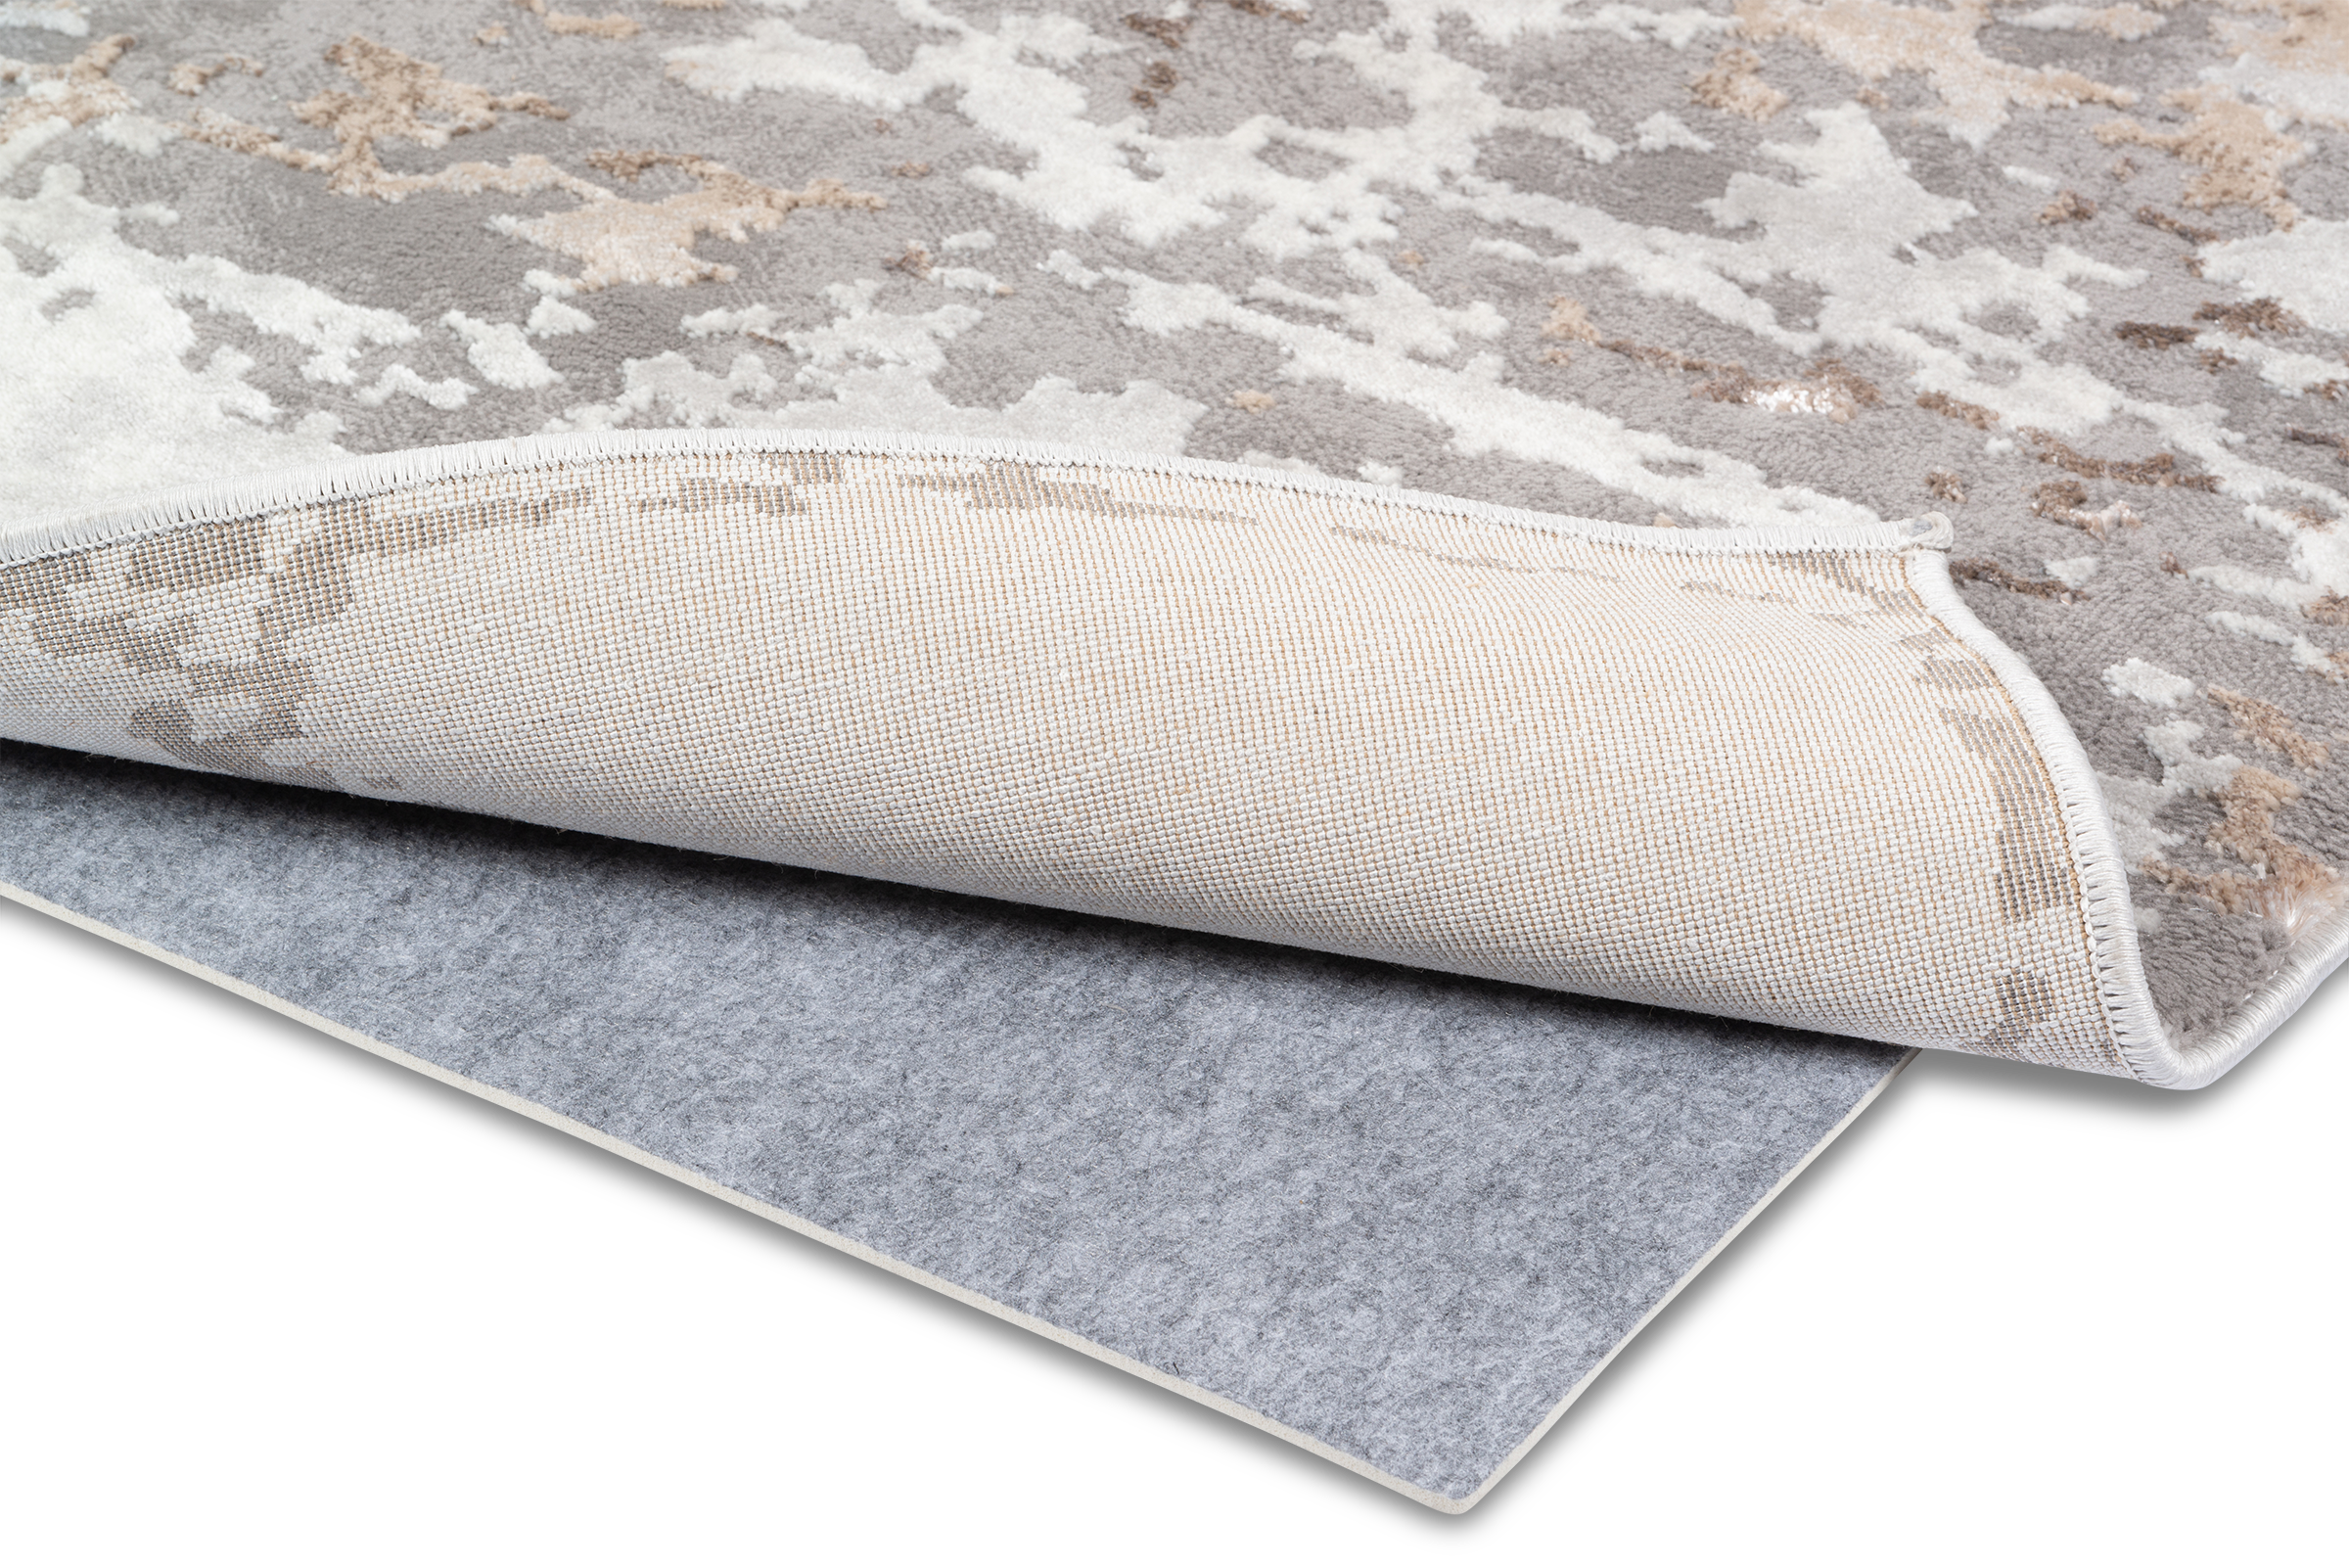 Rugs.com - 10 Ft Runner Everyday Performance Rug Pad 1/4 Thick Felt &  Non-Slip Backing Perfect for Any Flooring Surface